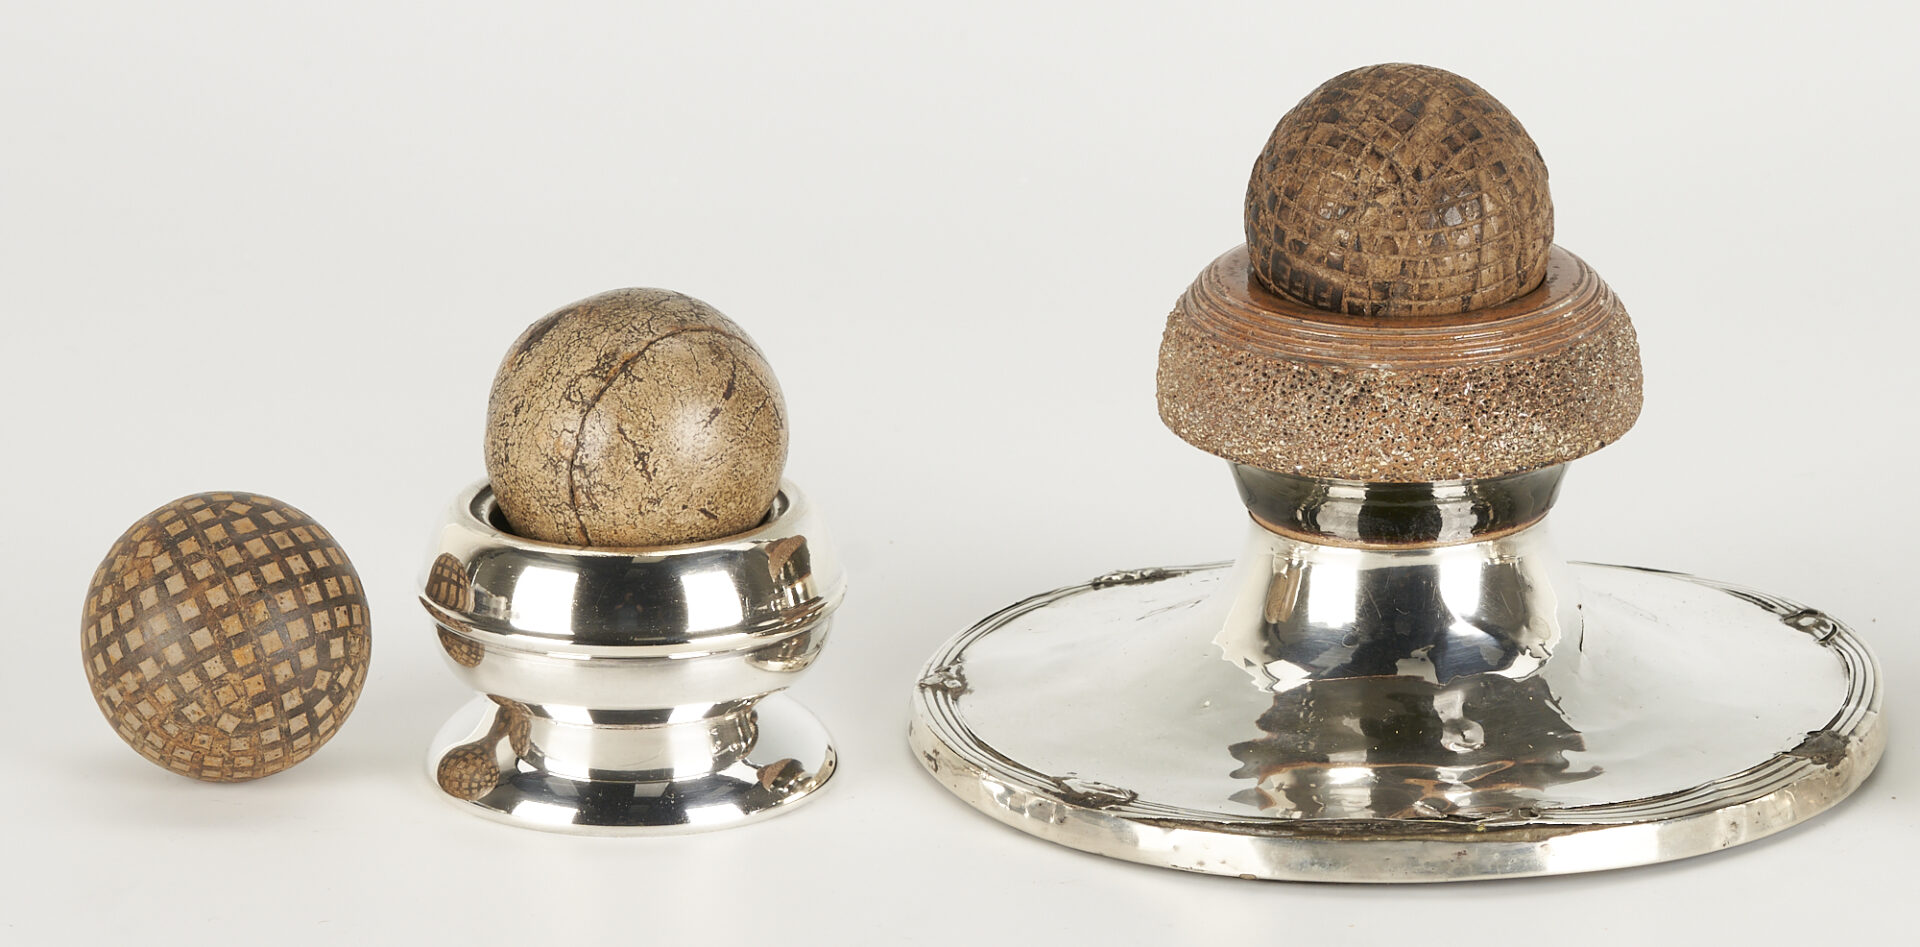 Lot 628: Collection of 5 Antique Golf / Chole Balls, 3 Stands